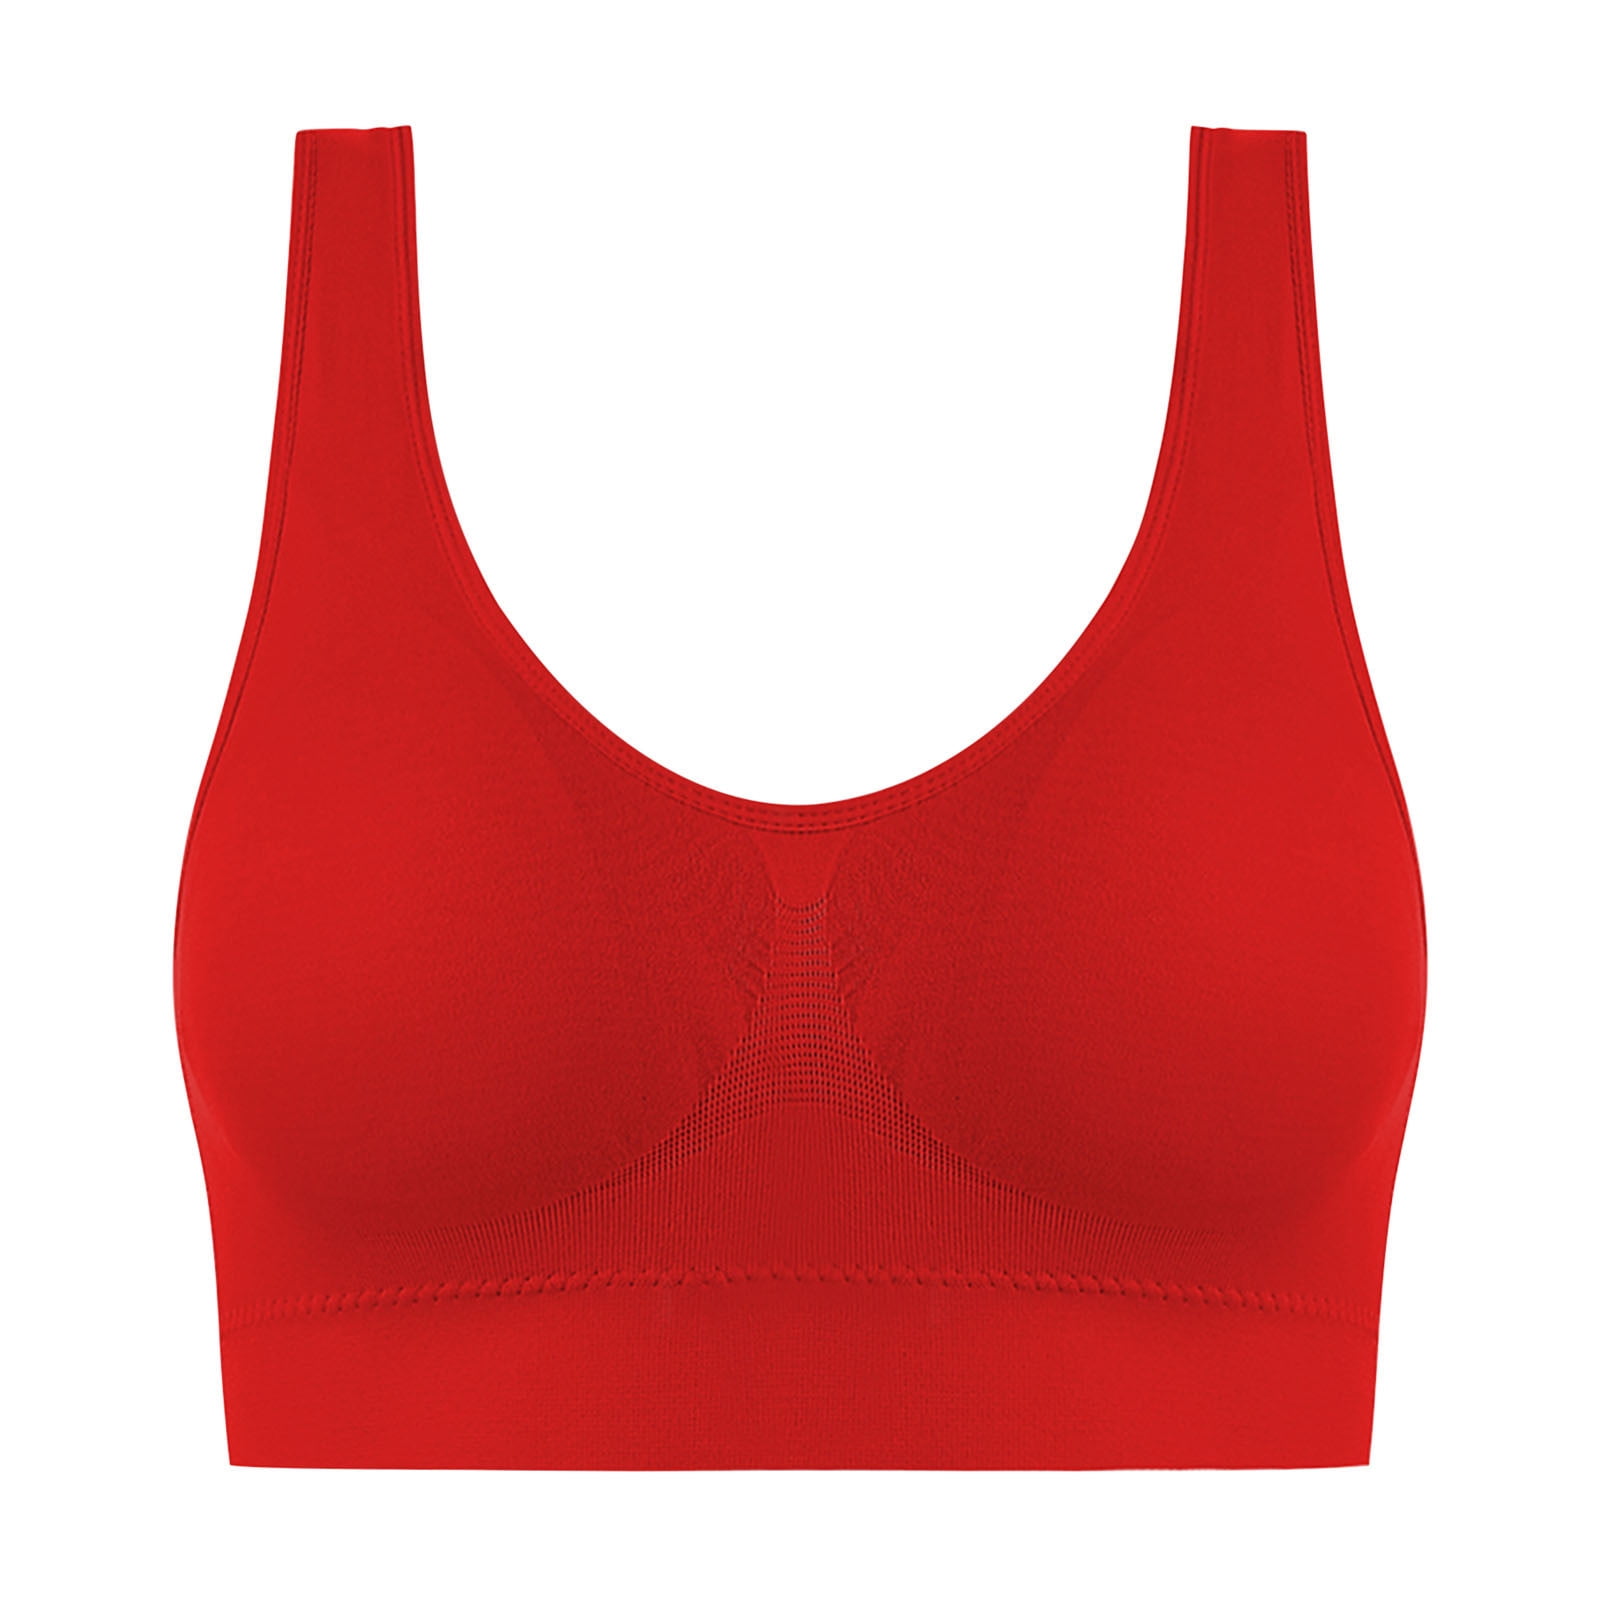 Deagia Clearance T Back Bras for Women Daily Thin Without Steel